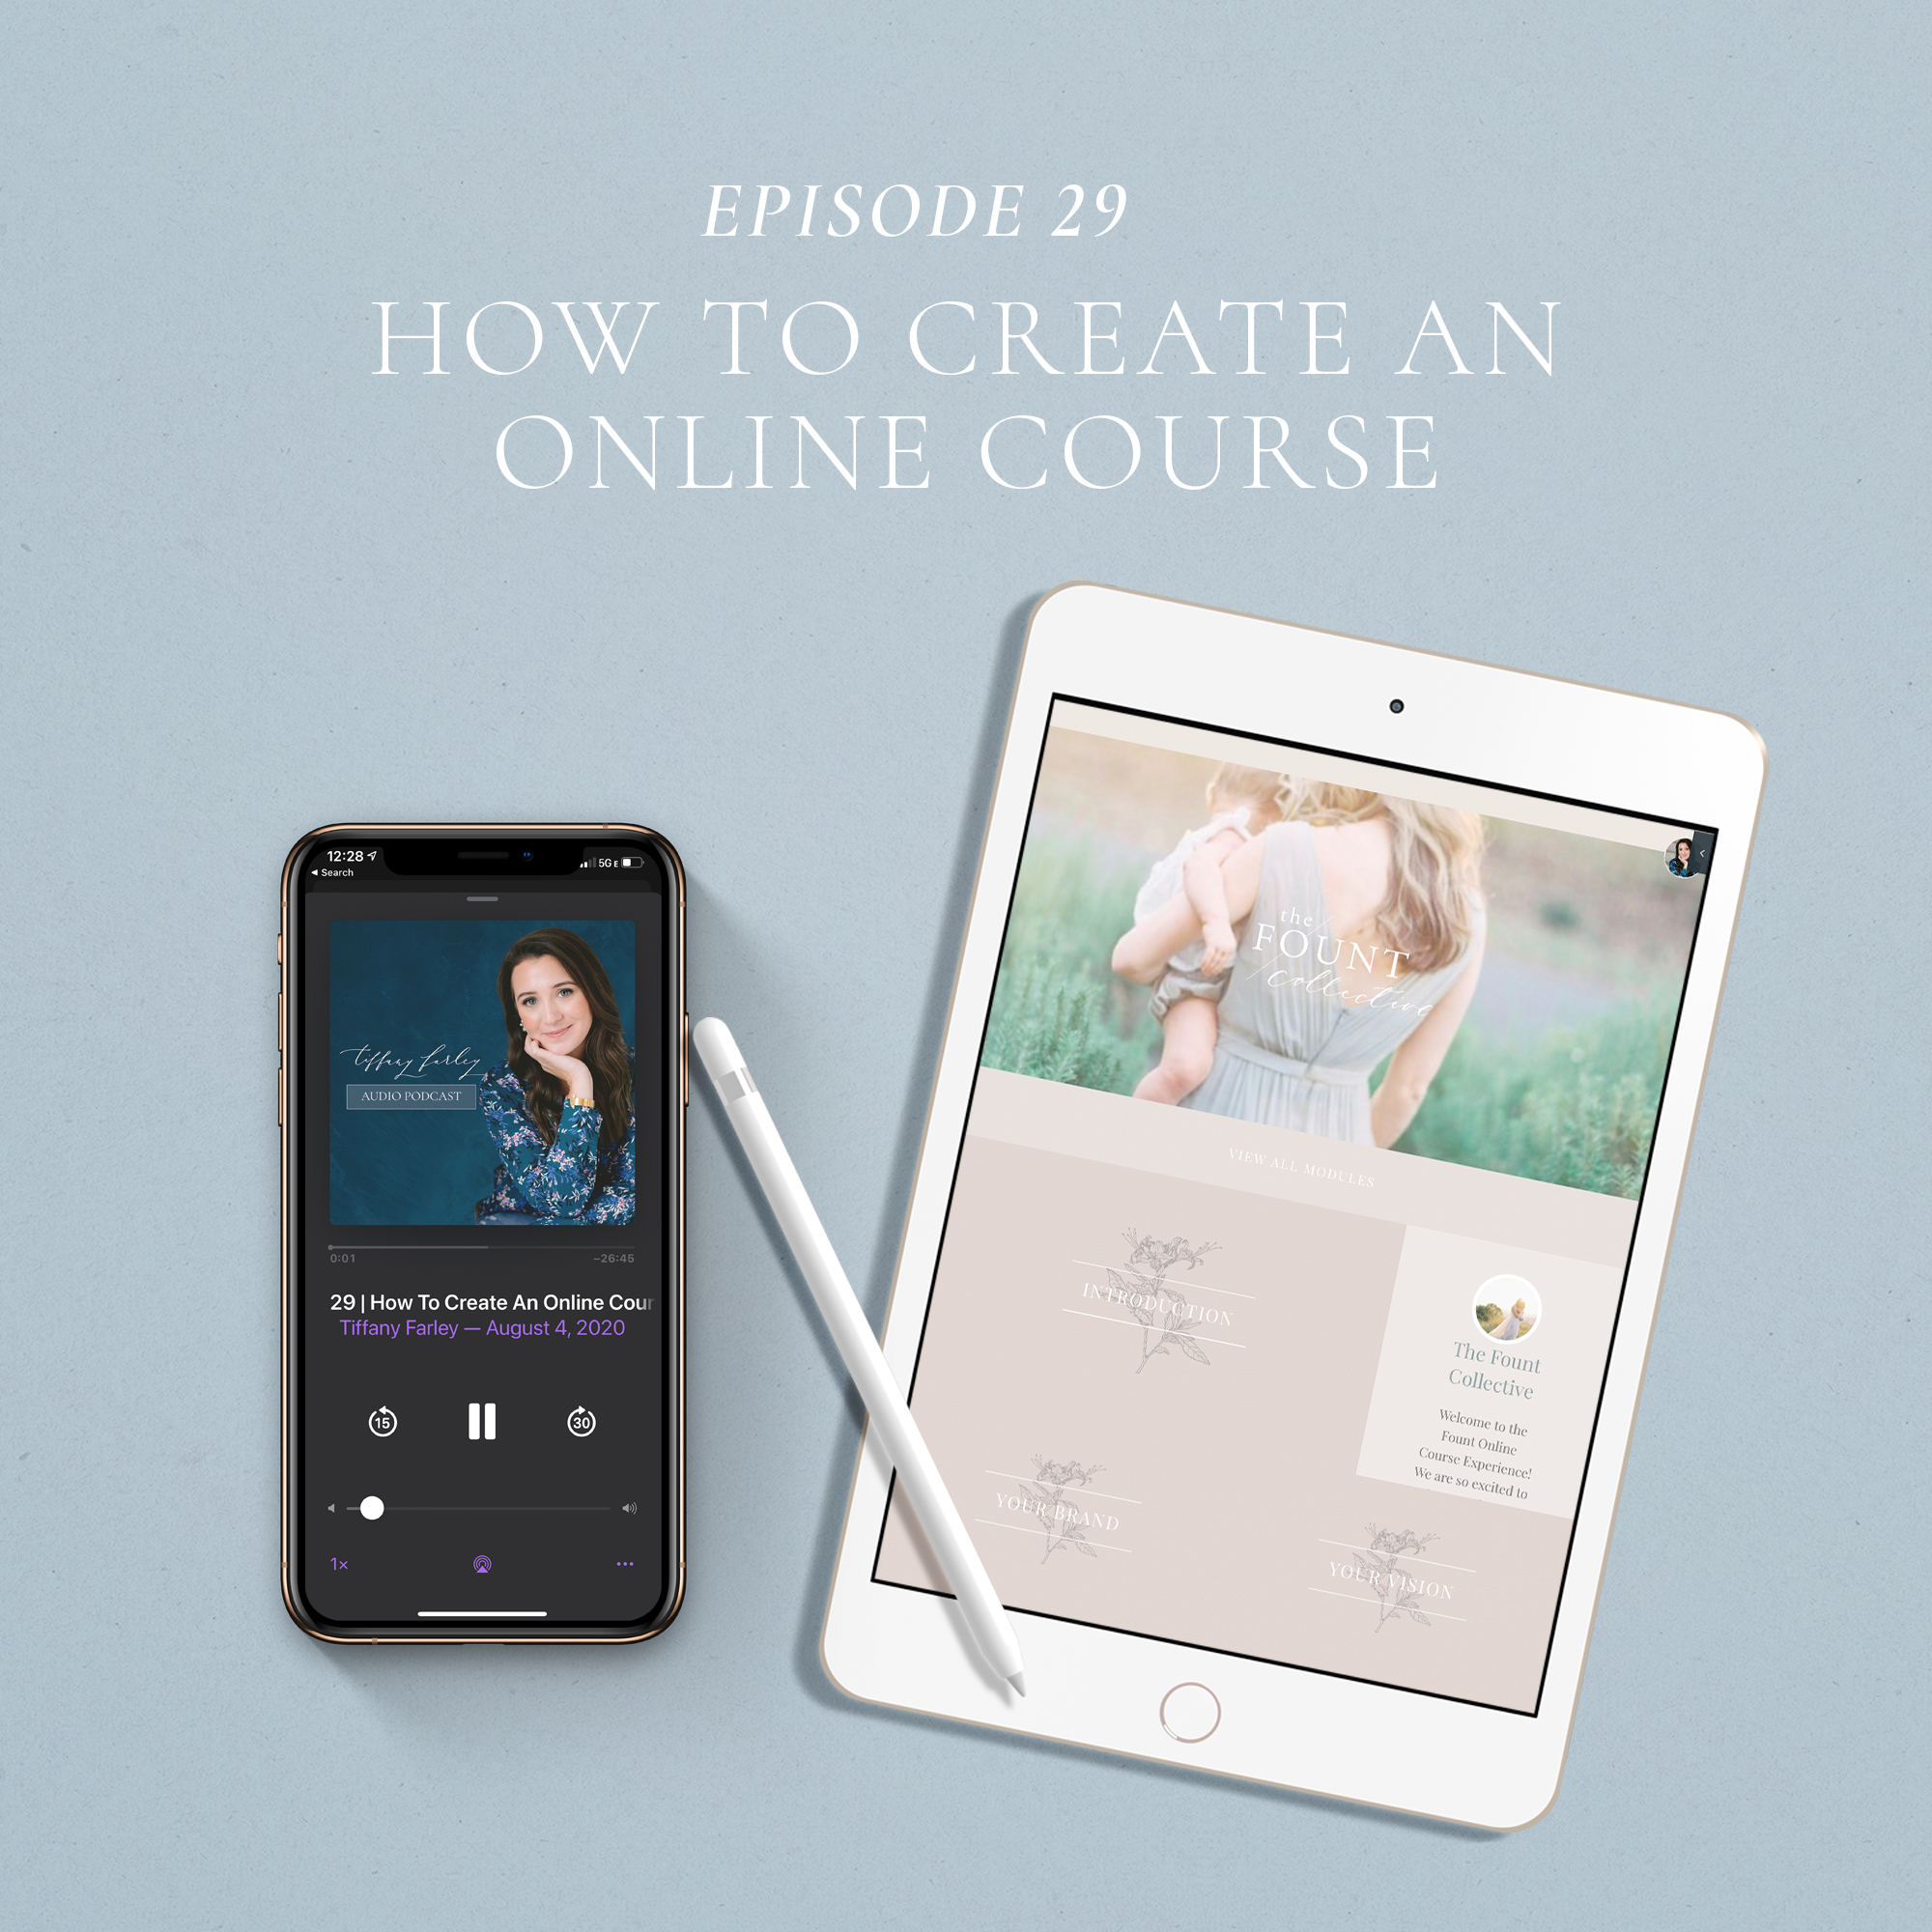 How To Create An Online Course on the Tiffany Farley Podcast